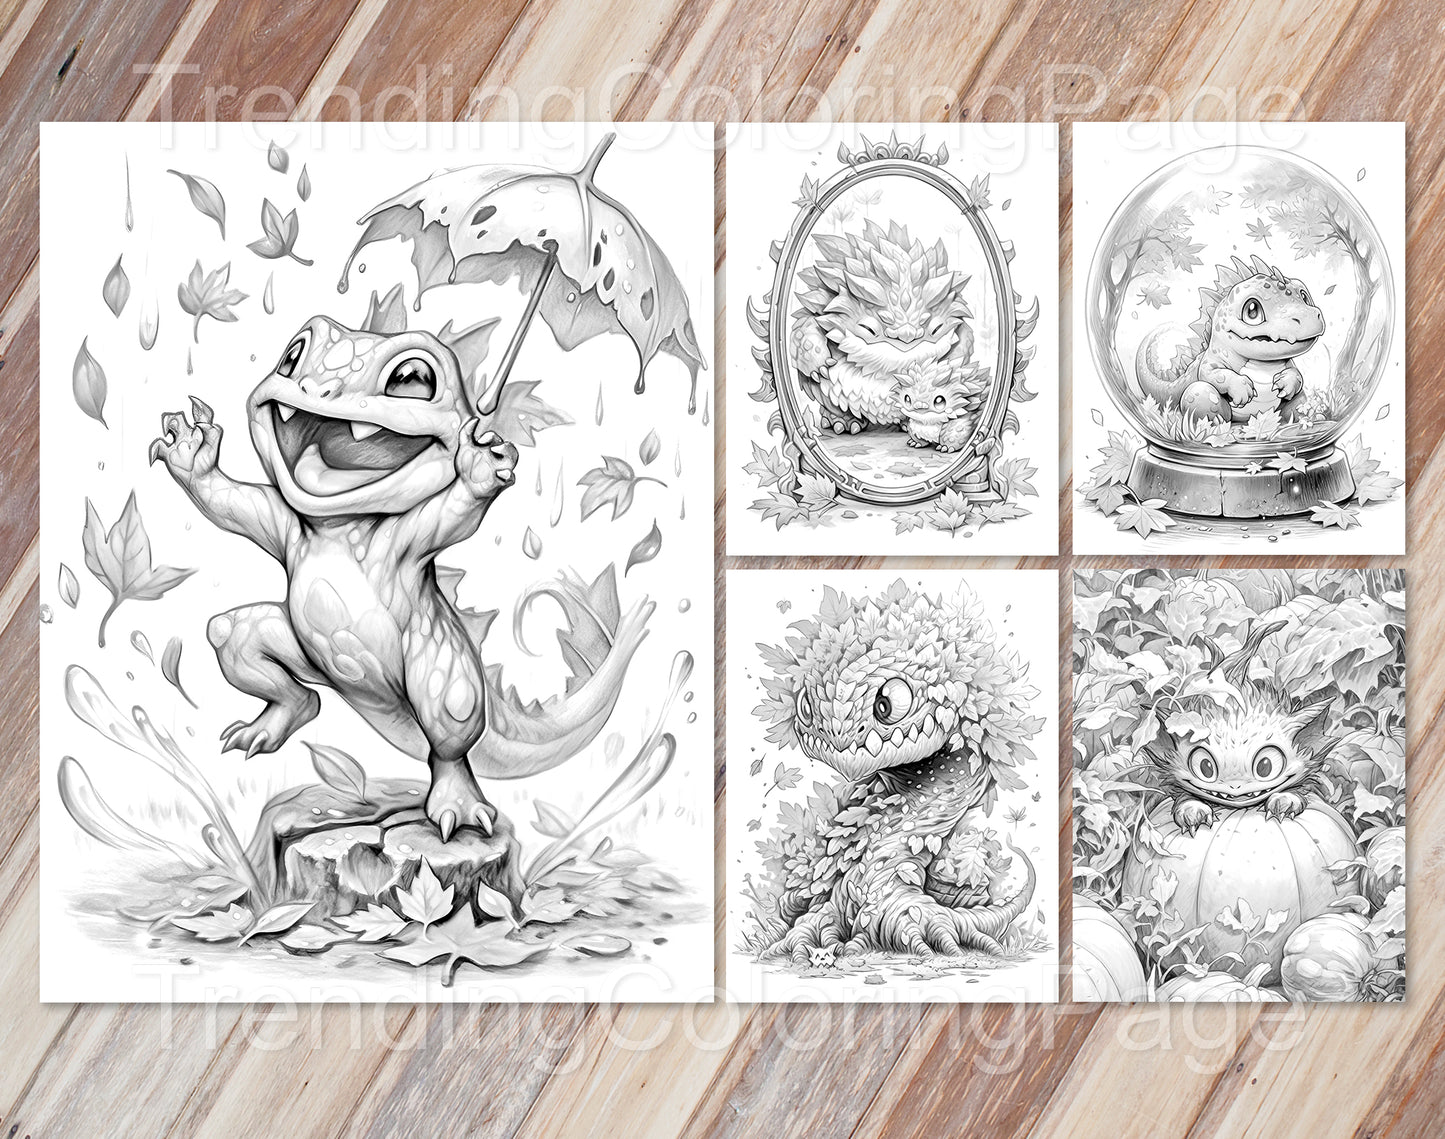 50 Adorable Autumn Monsters Grayscale Coloring Pages - Halloween Coloring - Instant Download - Printable PDF Dark/Light